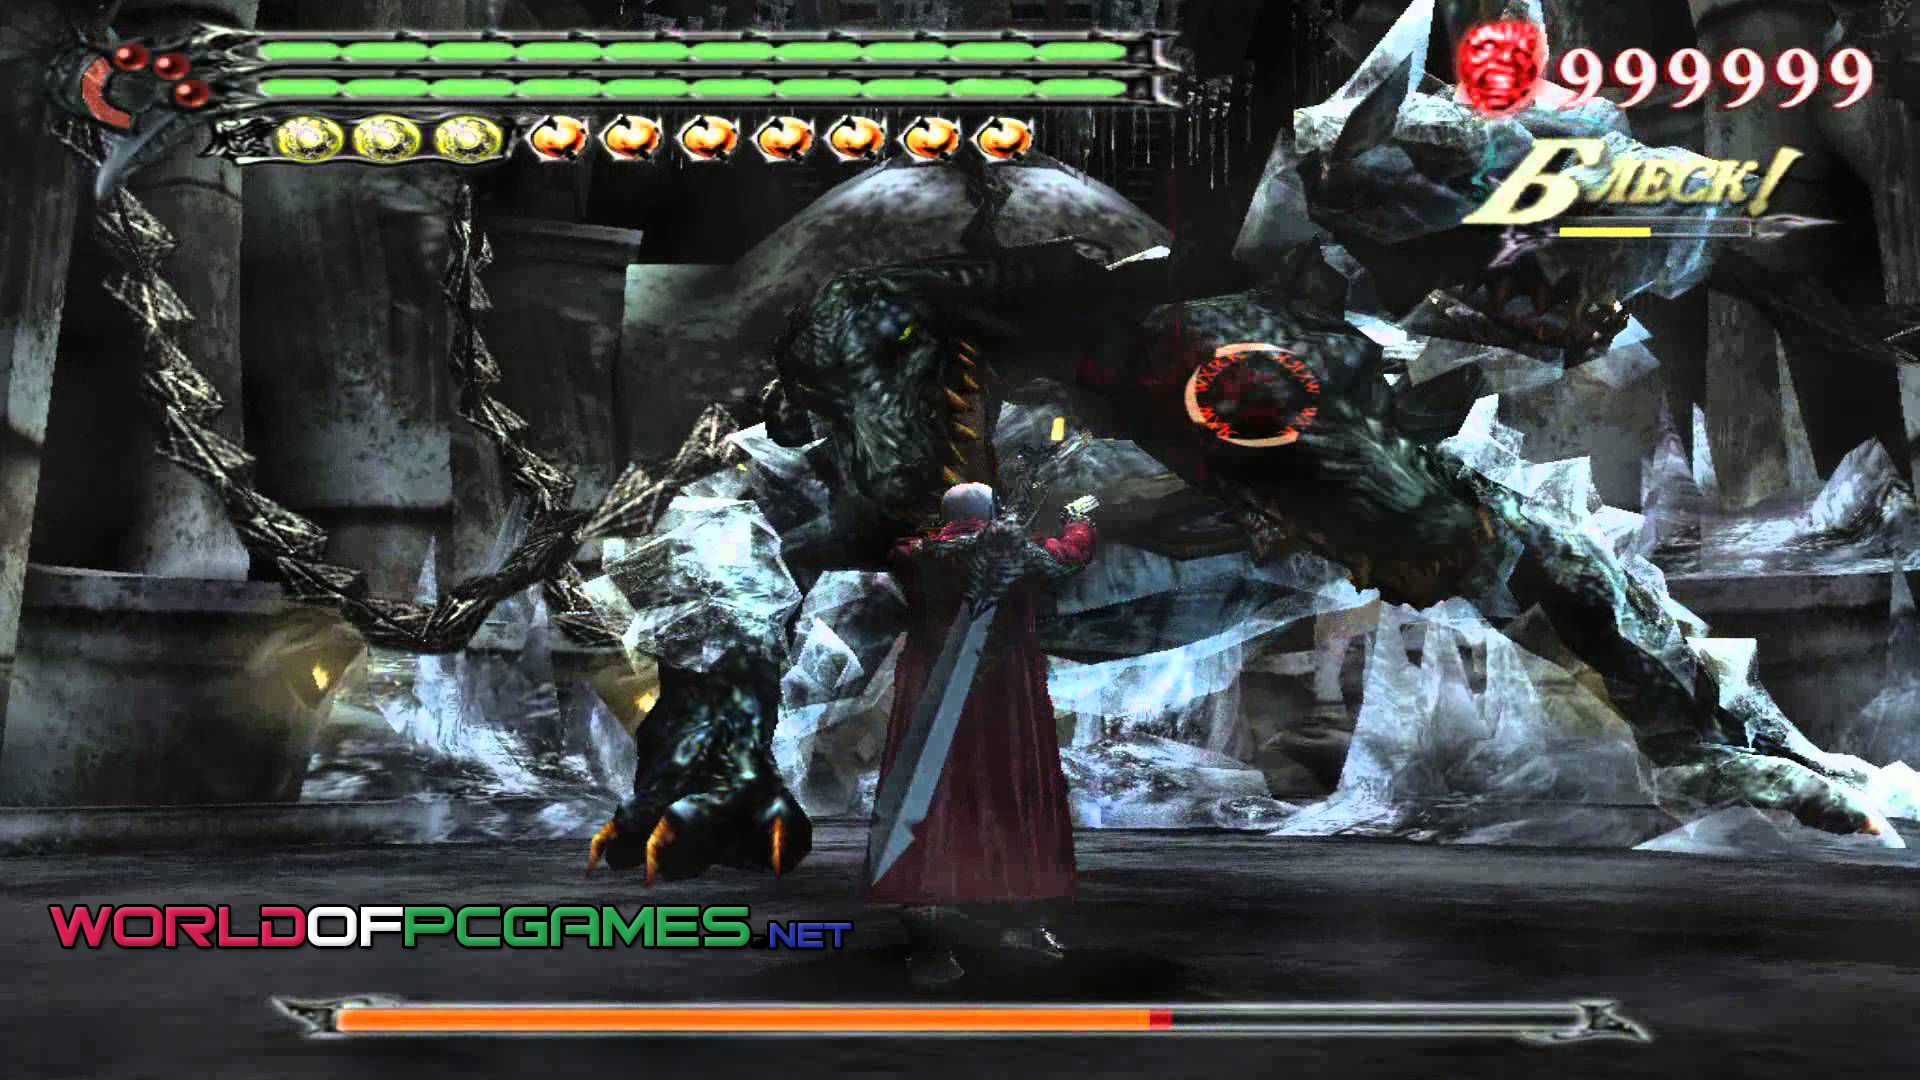 Devil May Cry 3 Free Download Special Edition PC Game By worldof-pcgames.netm